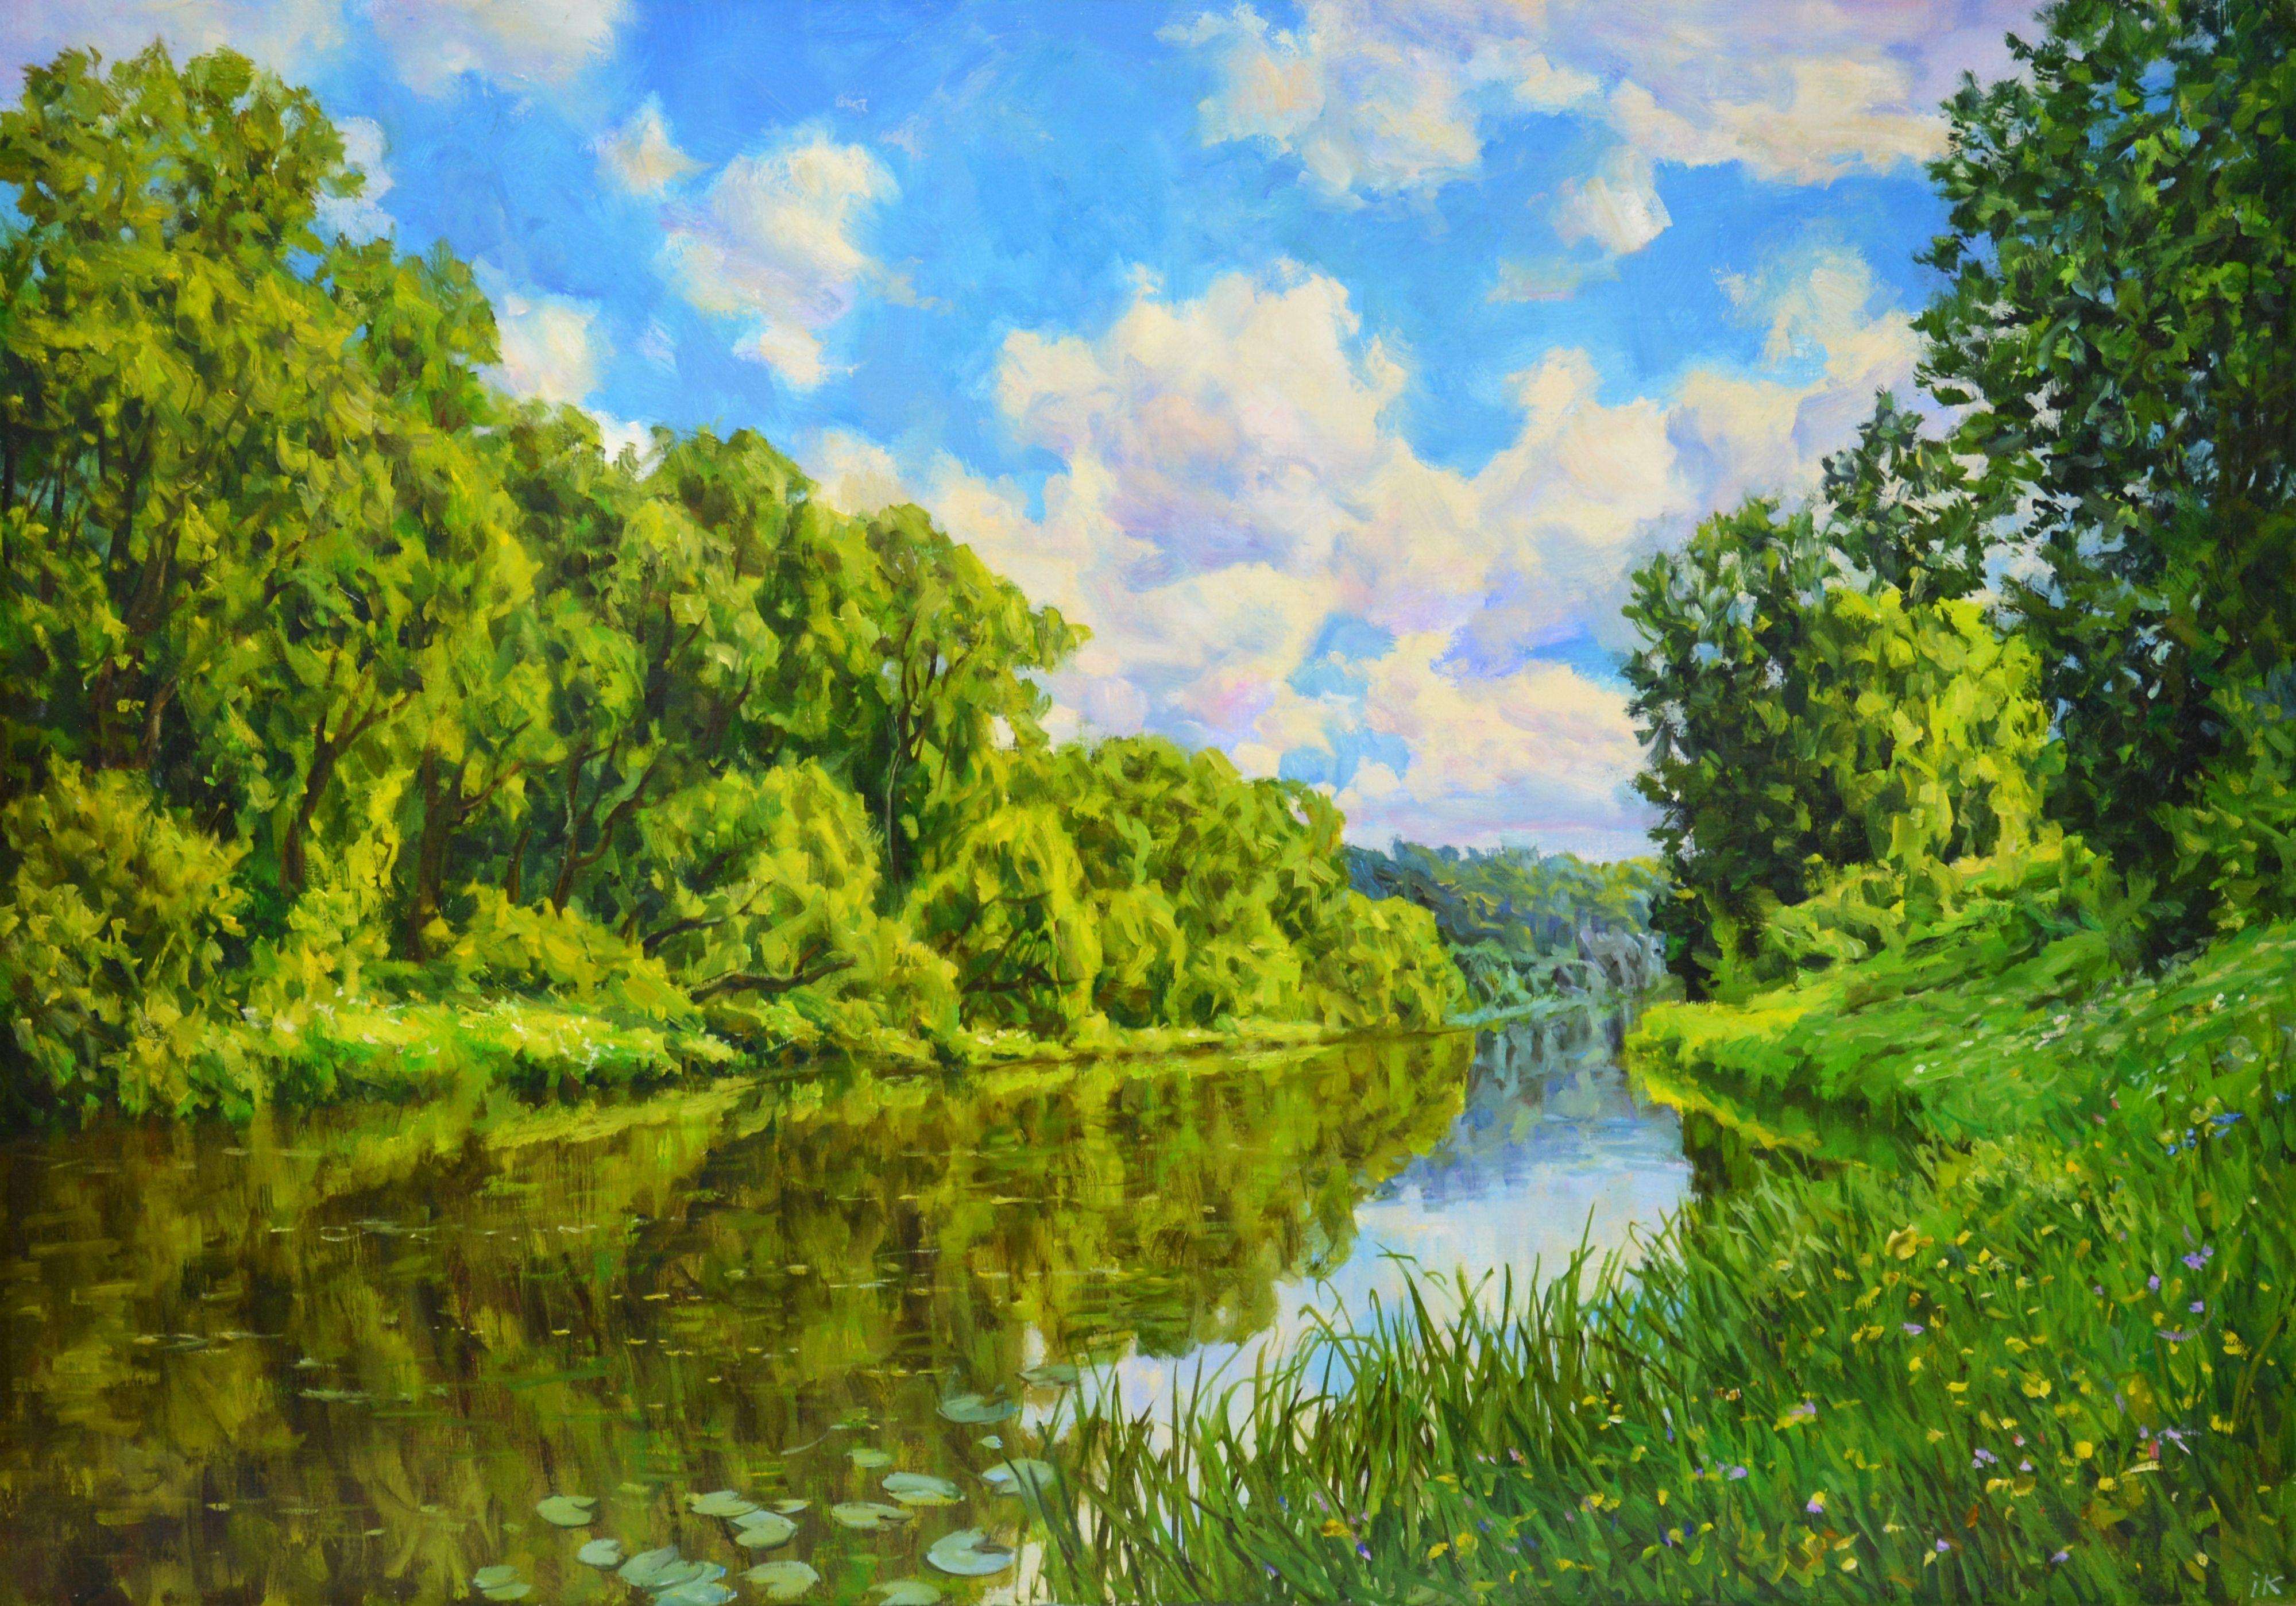 Picture Quiet River. Realism. Summer landscape: a rich palette of greenery, water, the reflection of the sky in the water evoke a feeling of love and appreciation for nature. The picture has good spatial quality and the colors are childish. Quality